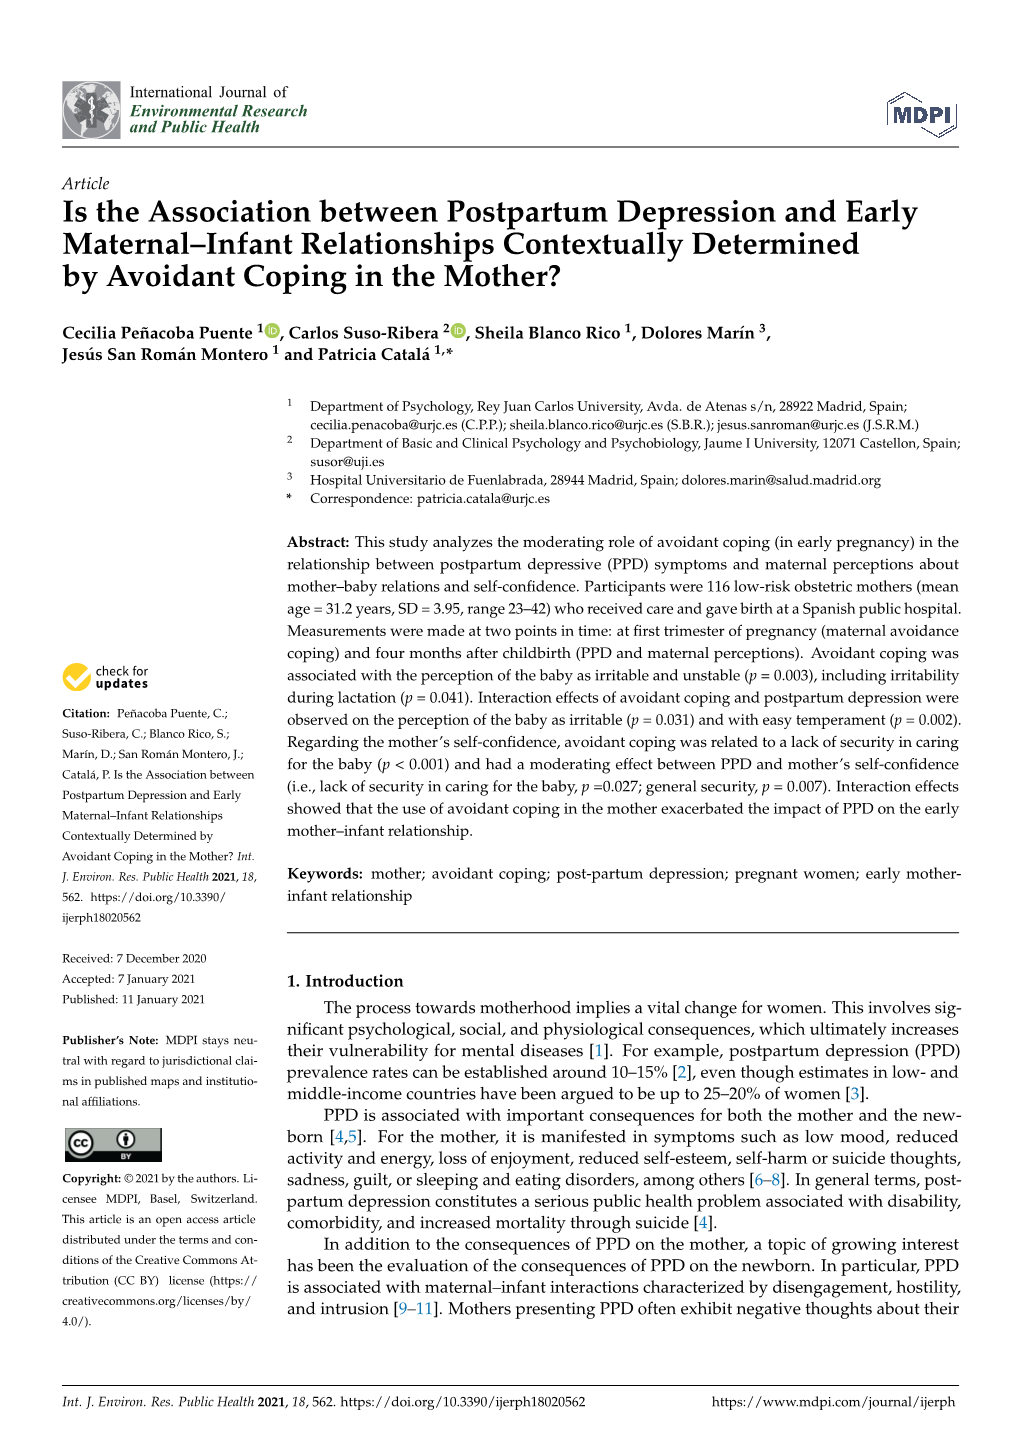 Is the Association Between Postpartum Depression and Early Maternal–Infant Relationships Contextually Determined by Avoidant Coping in the Mother?